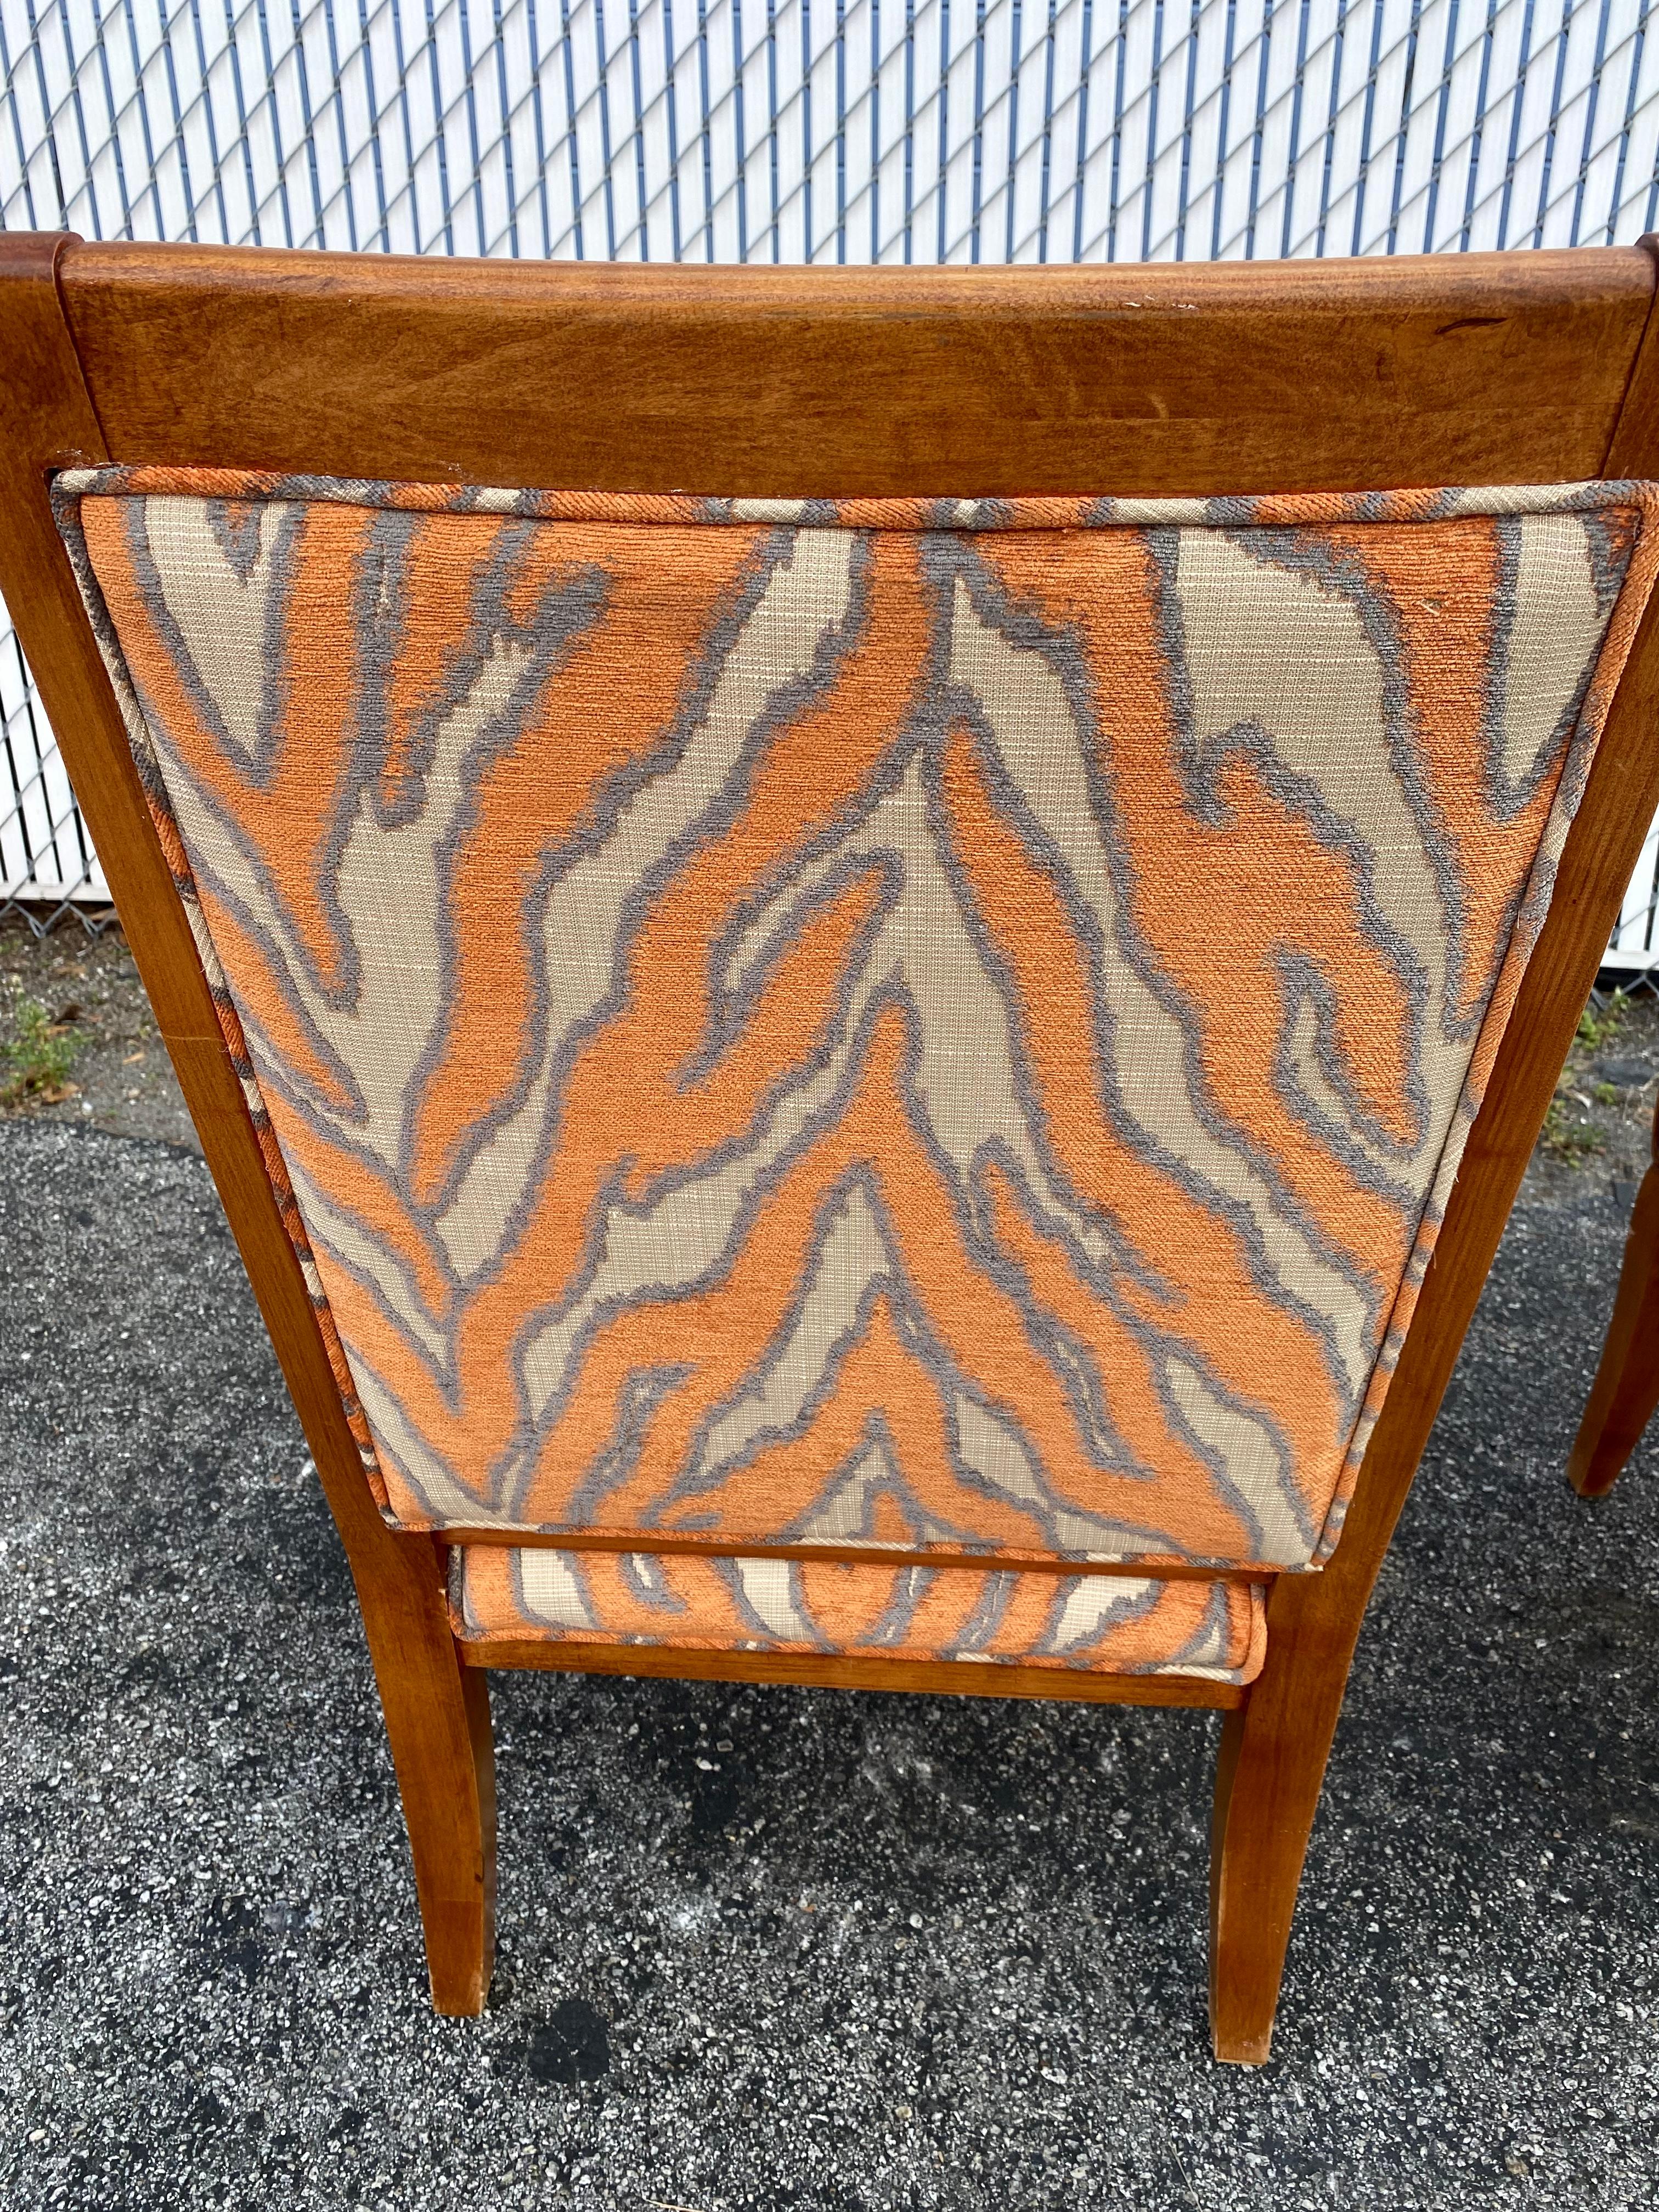 1970s Carved Wood Gold Fish Zebra Bentwood Chairs and Ottoman, Set of 3 For Sale 10